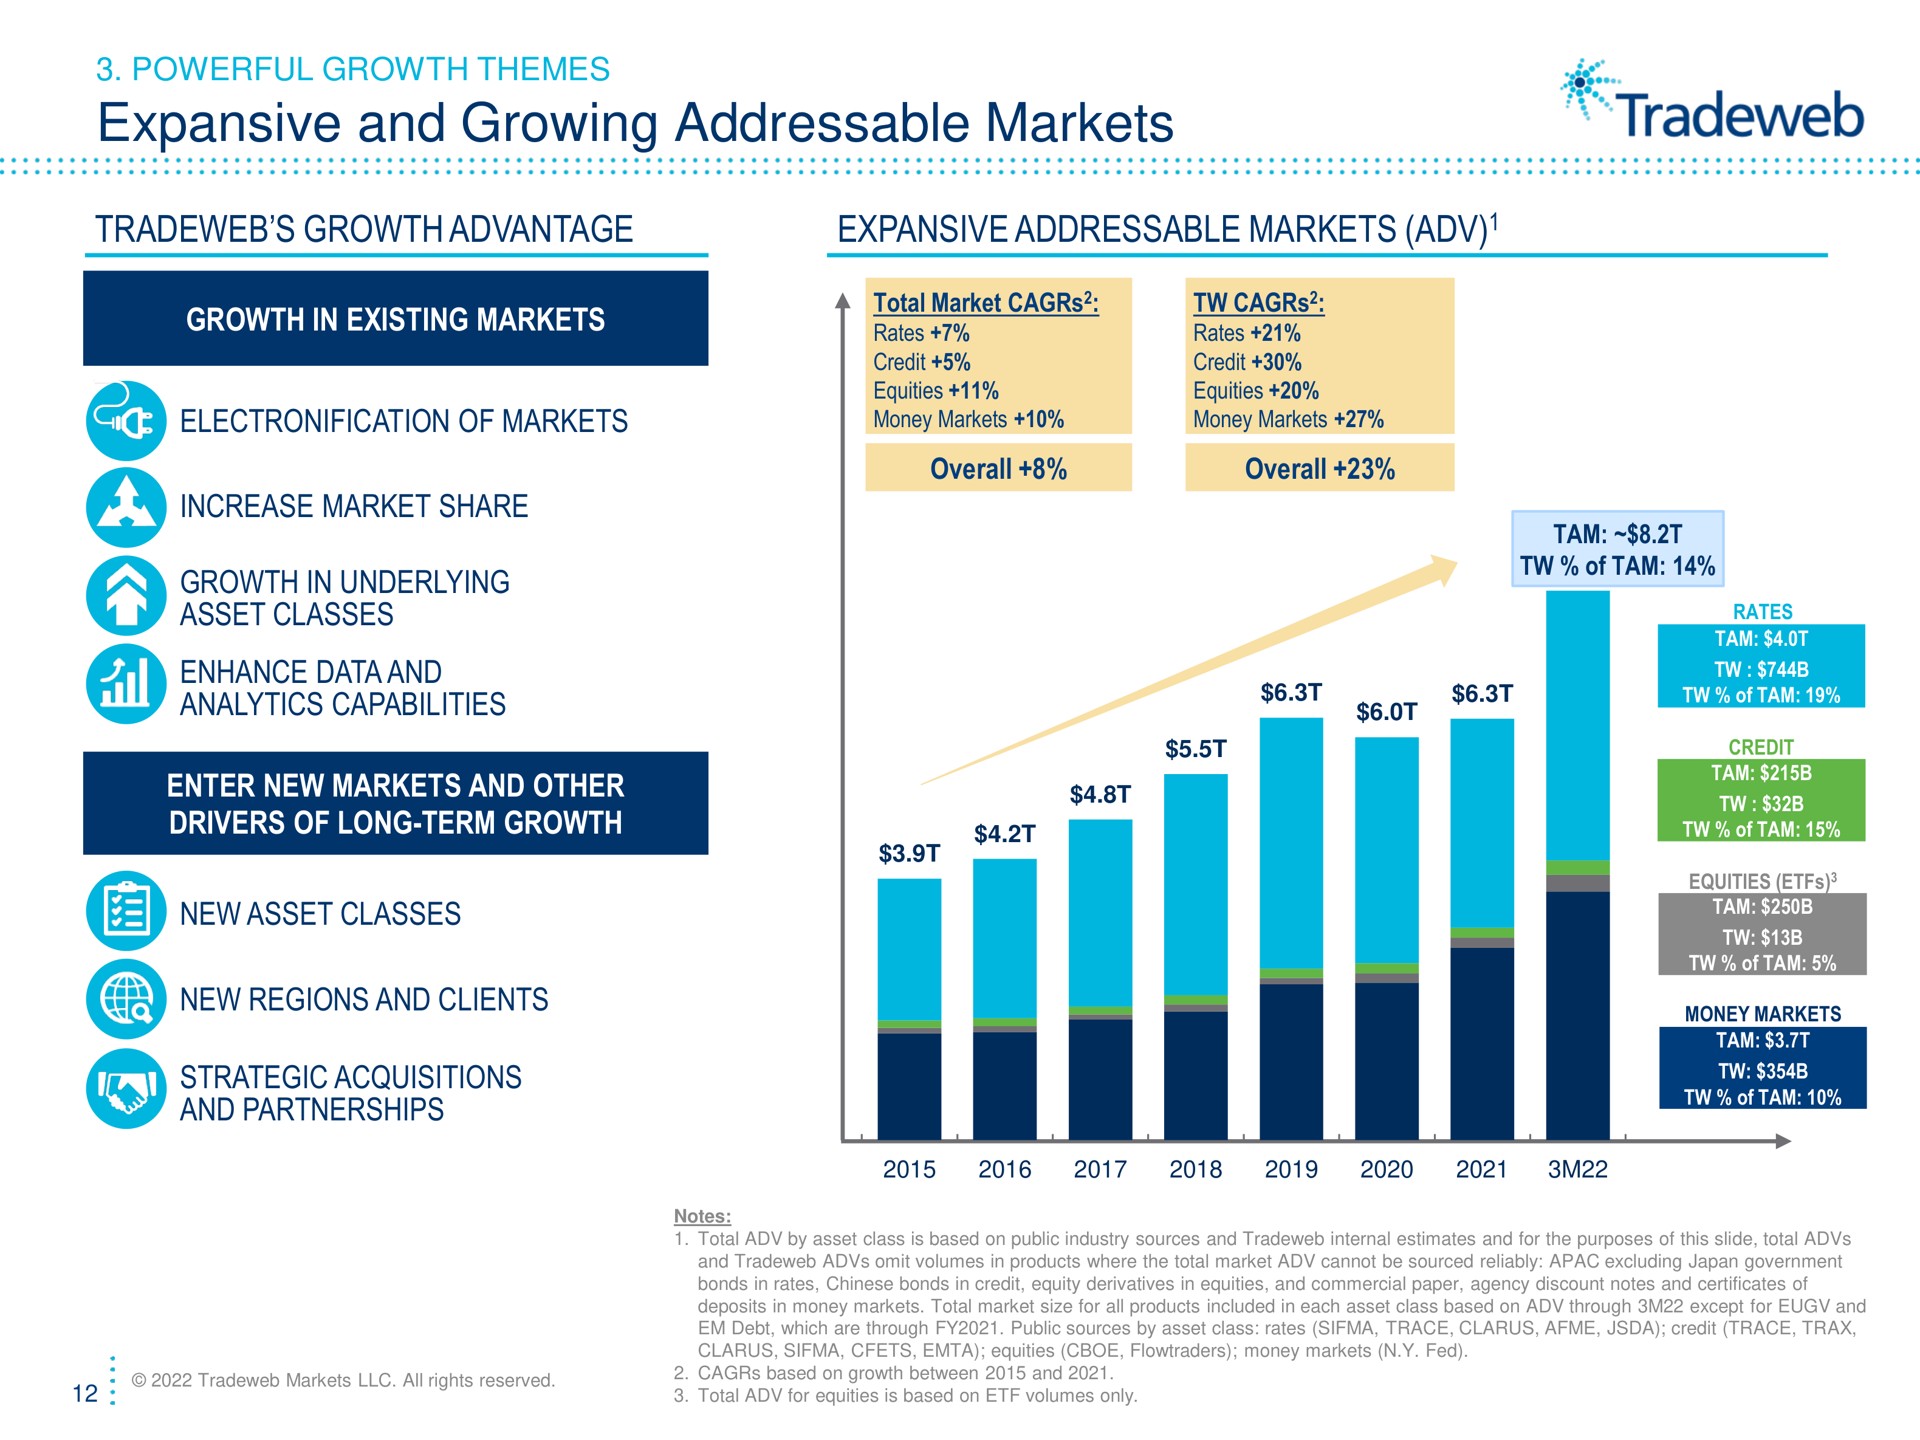 expansive and growing markets growth advantage expansive markets powerful themes total market money money in existing of increase market share in underlying asset classes enhance data analytics capabilities enter new other drivers of long term new asset classes new regions clients strategic acquisitions partnerships rates coe of tam of tam all rights reserved based on between | Tradeweb